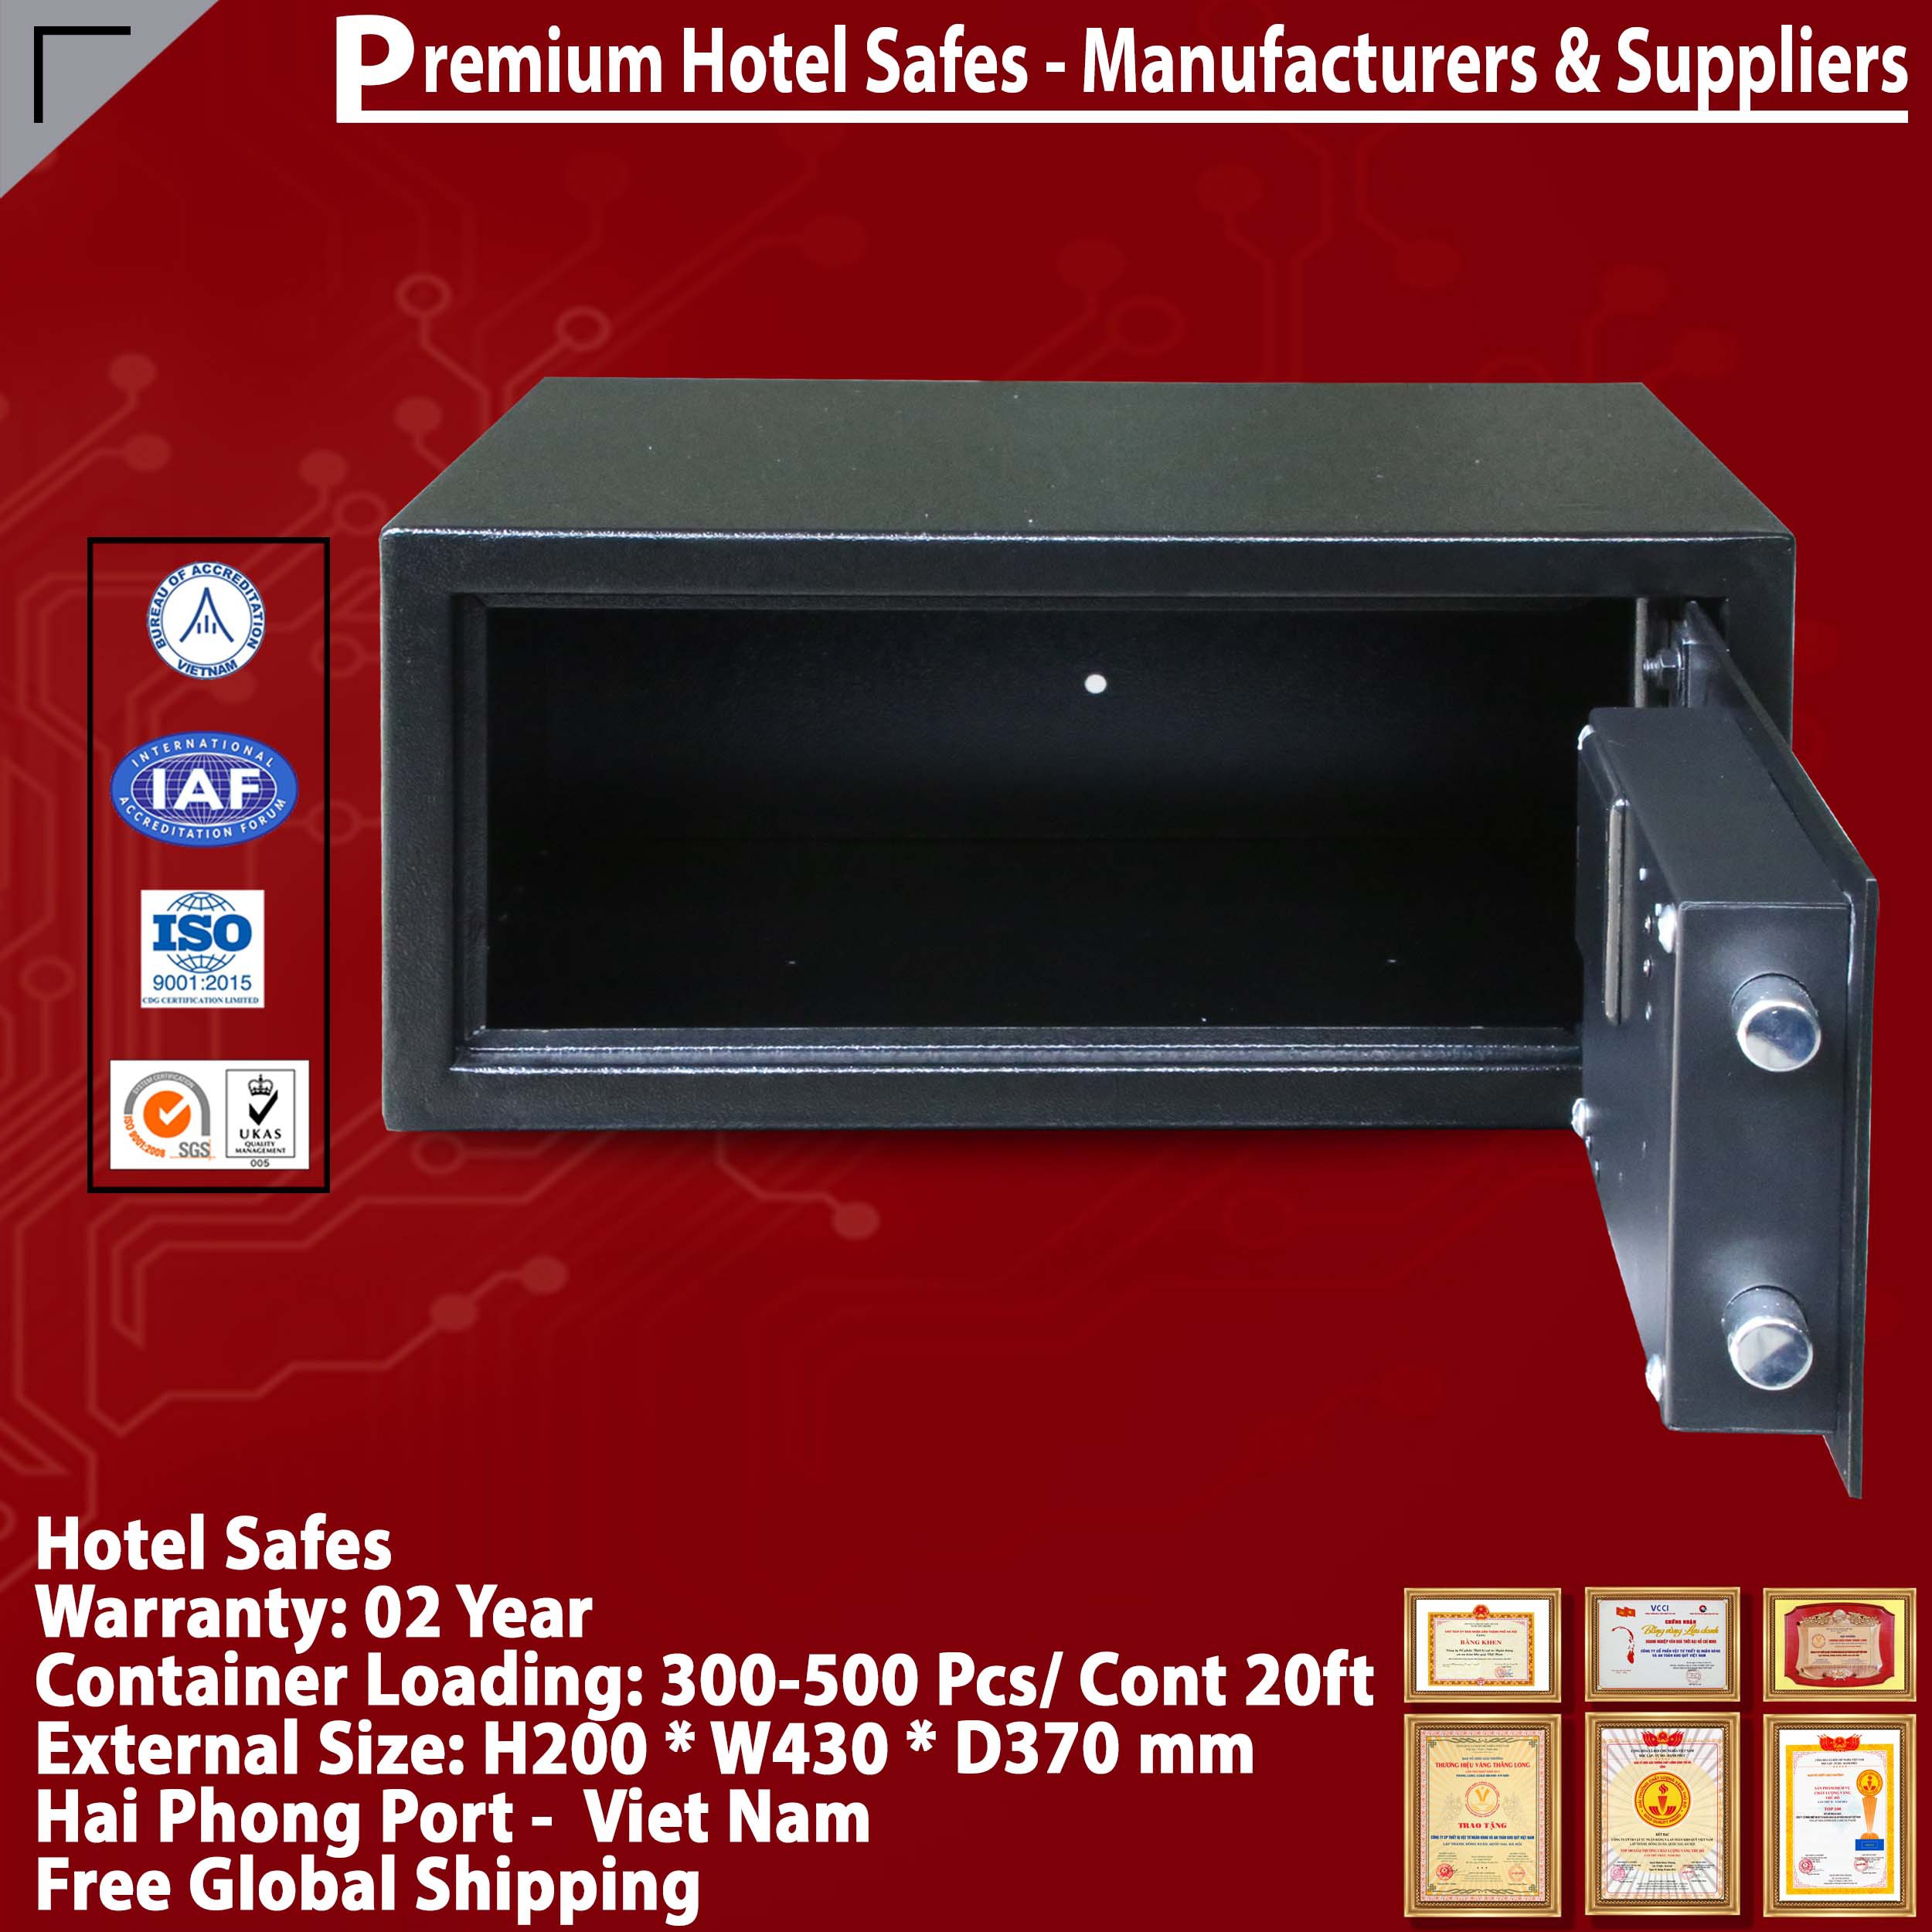 Best Hotel Safe For Home Made In Viet Nam